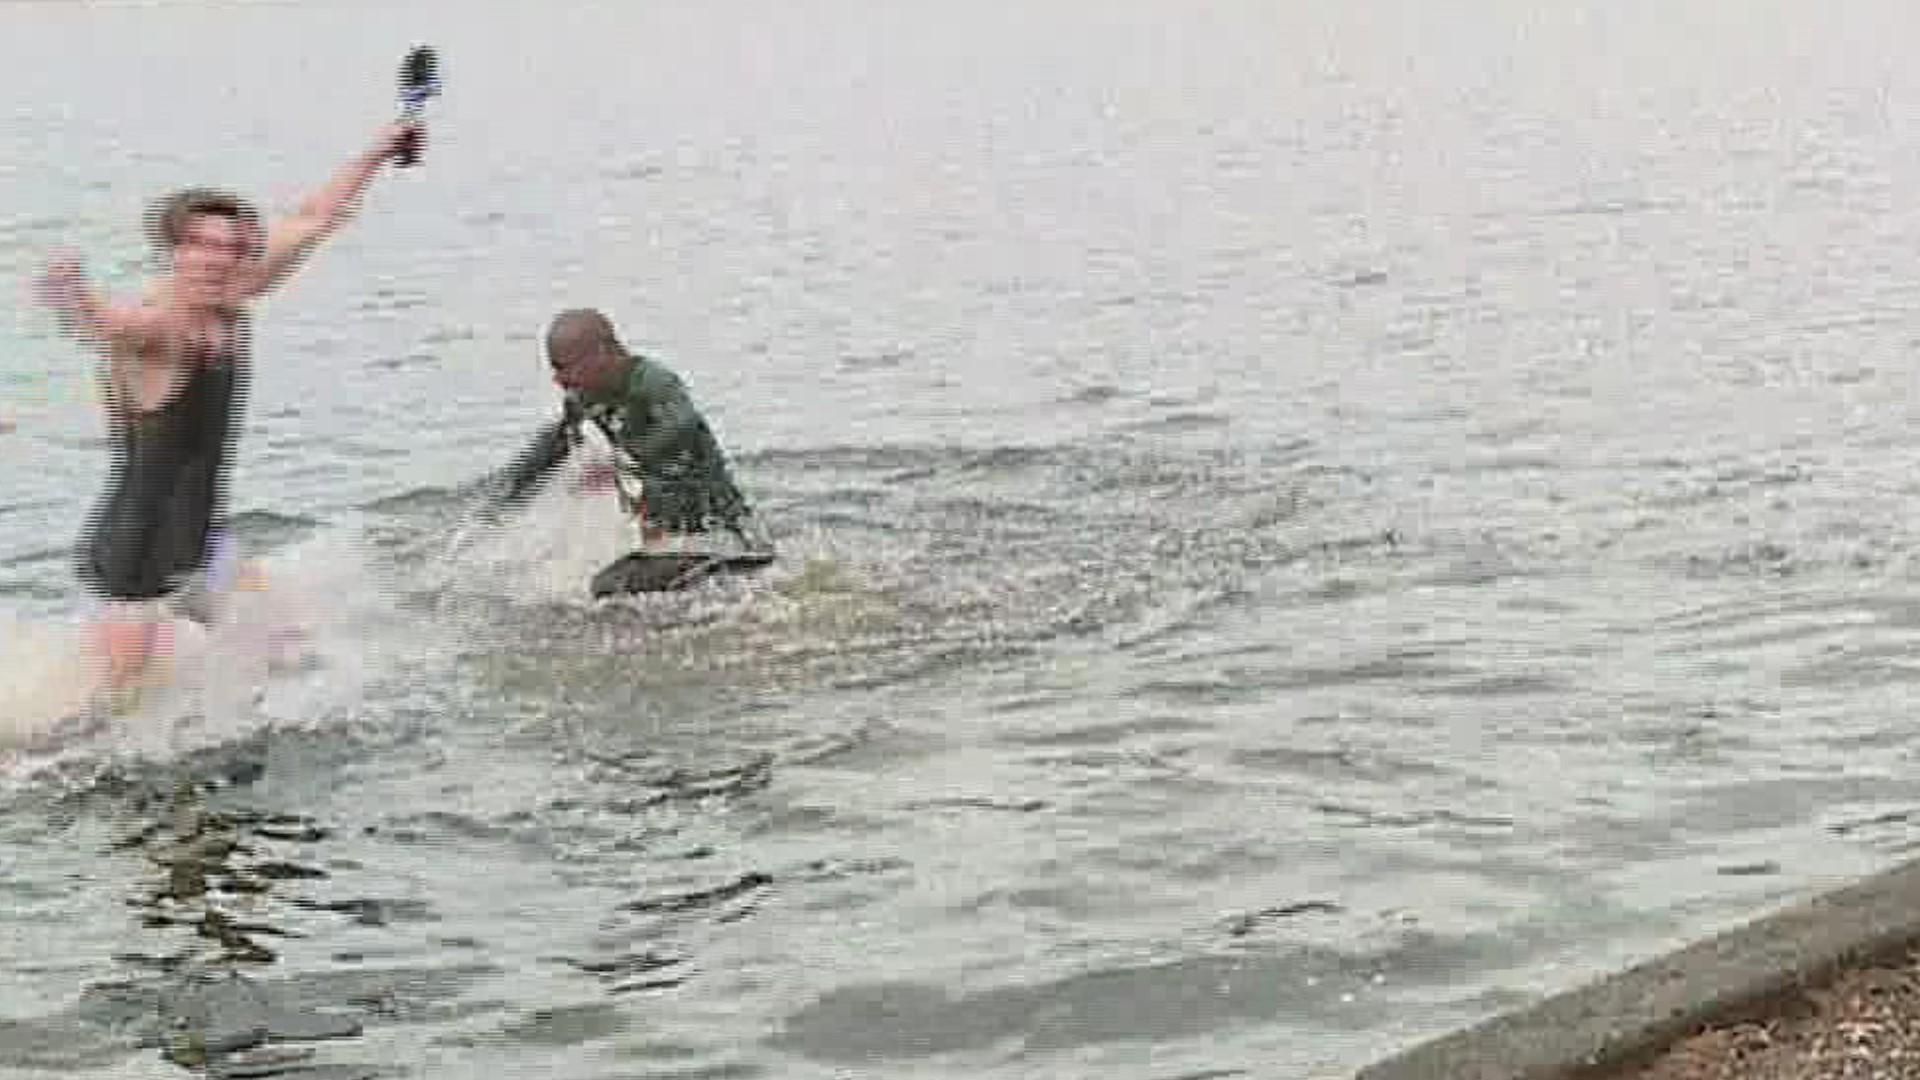 Special Olympics Pennsylvania is hosting their 20th annual Polar Plunge at Gifford Pinchot State Park on Saturday morning.